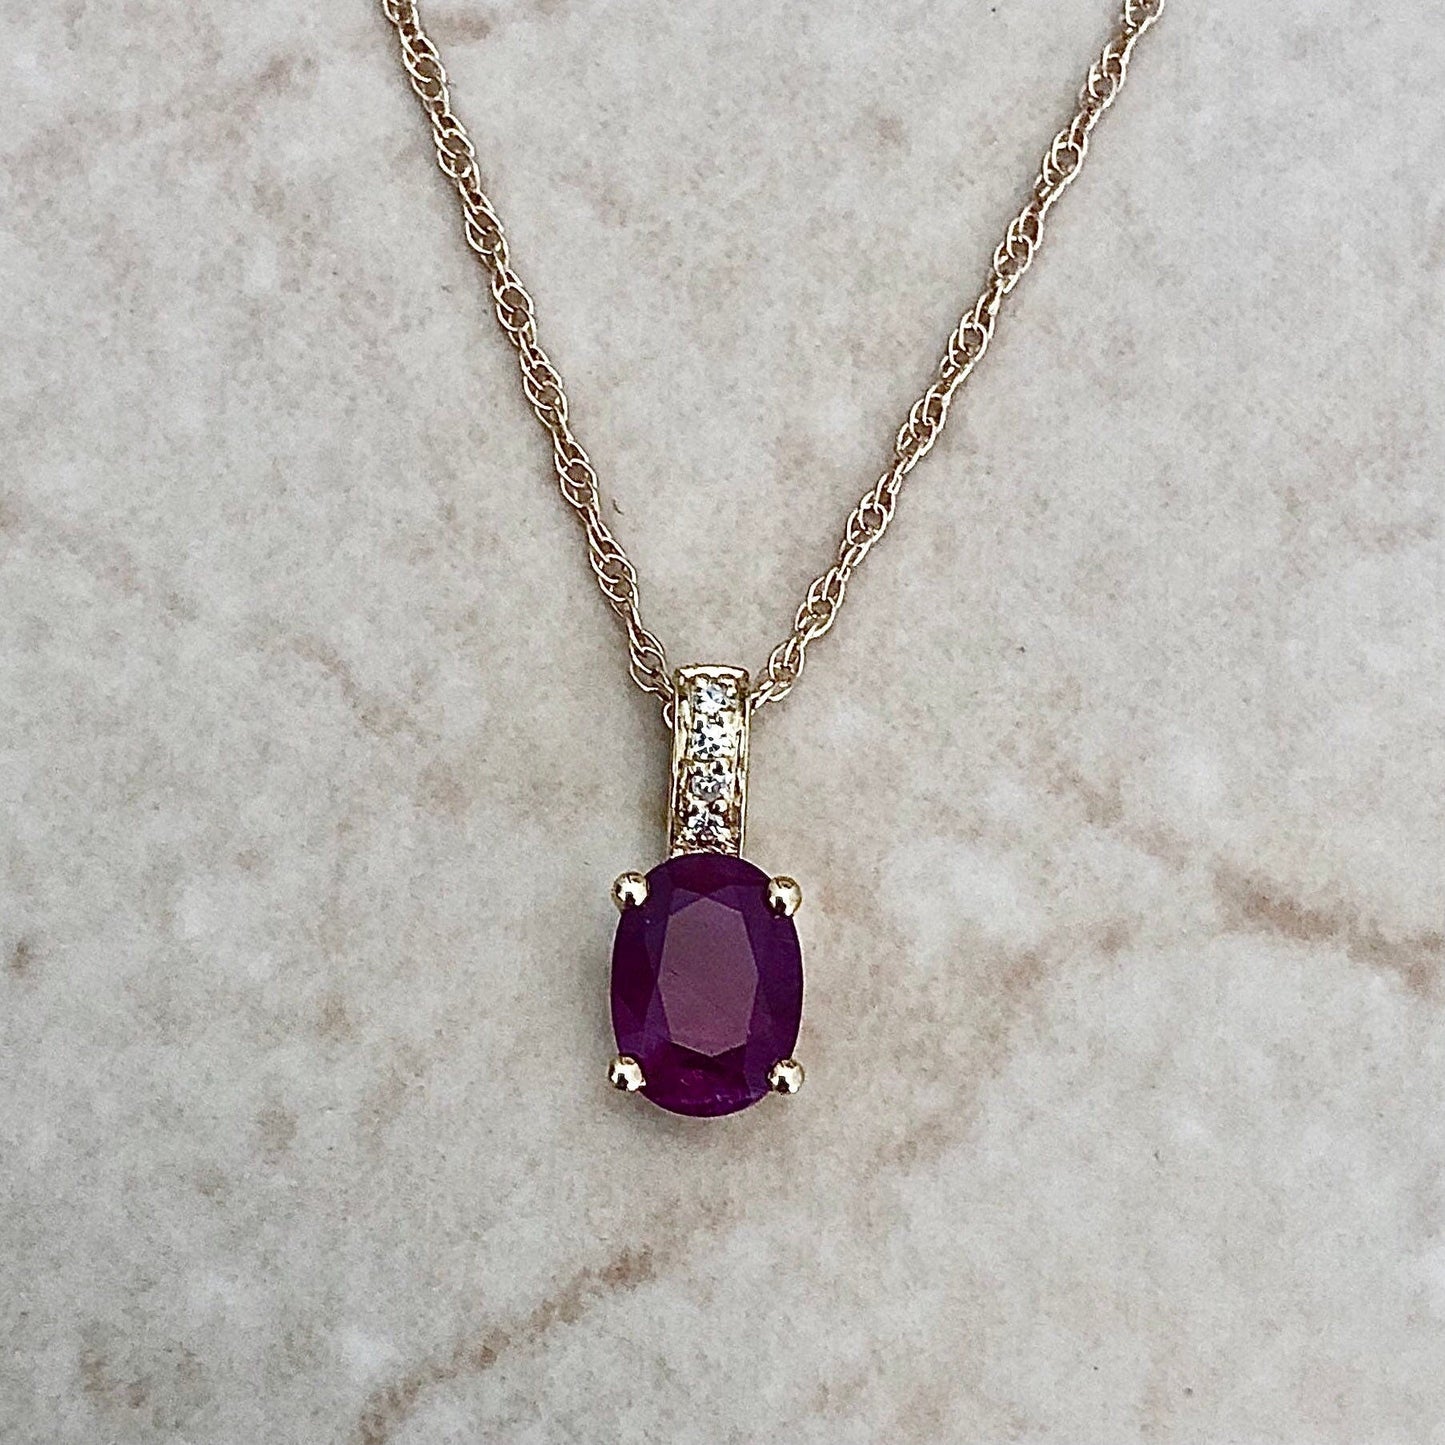 14K Ruby & Diamond Pendant Necklace - Yellow Gold Ruby Pendant - July Birthstone - Ruby Solitaire Pendant - Best Gift For Her